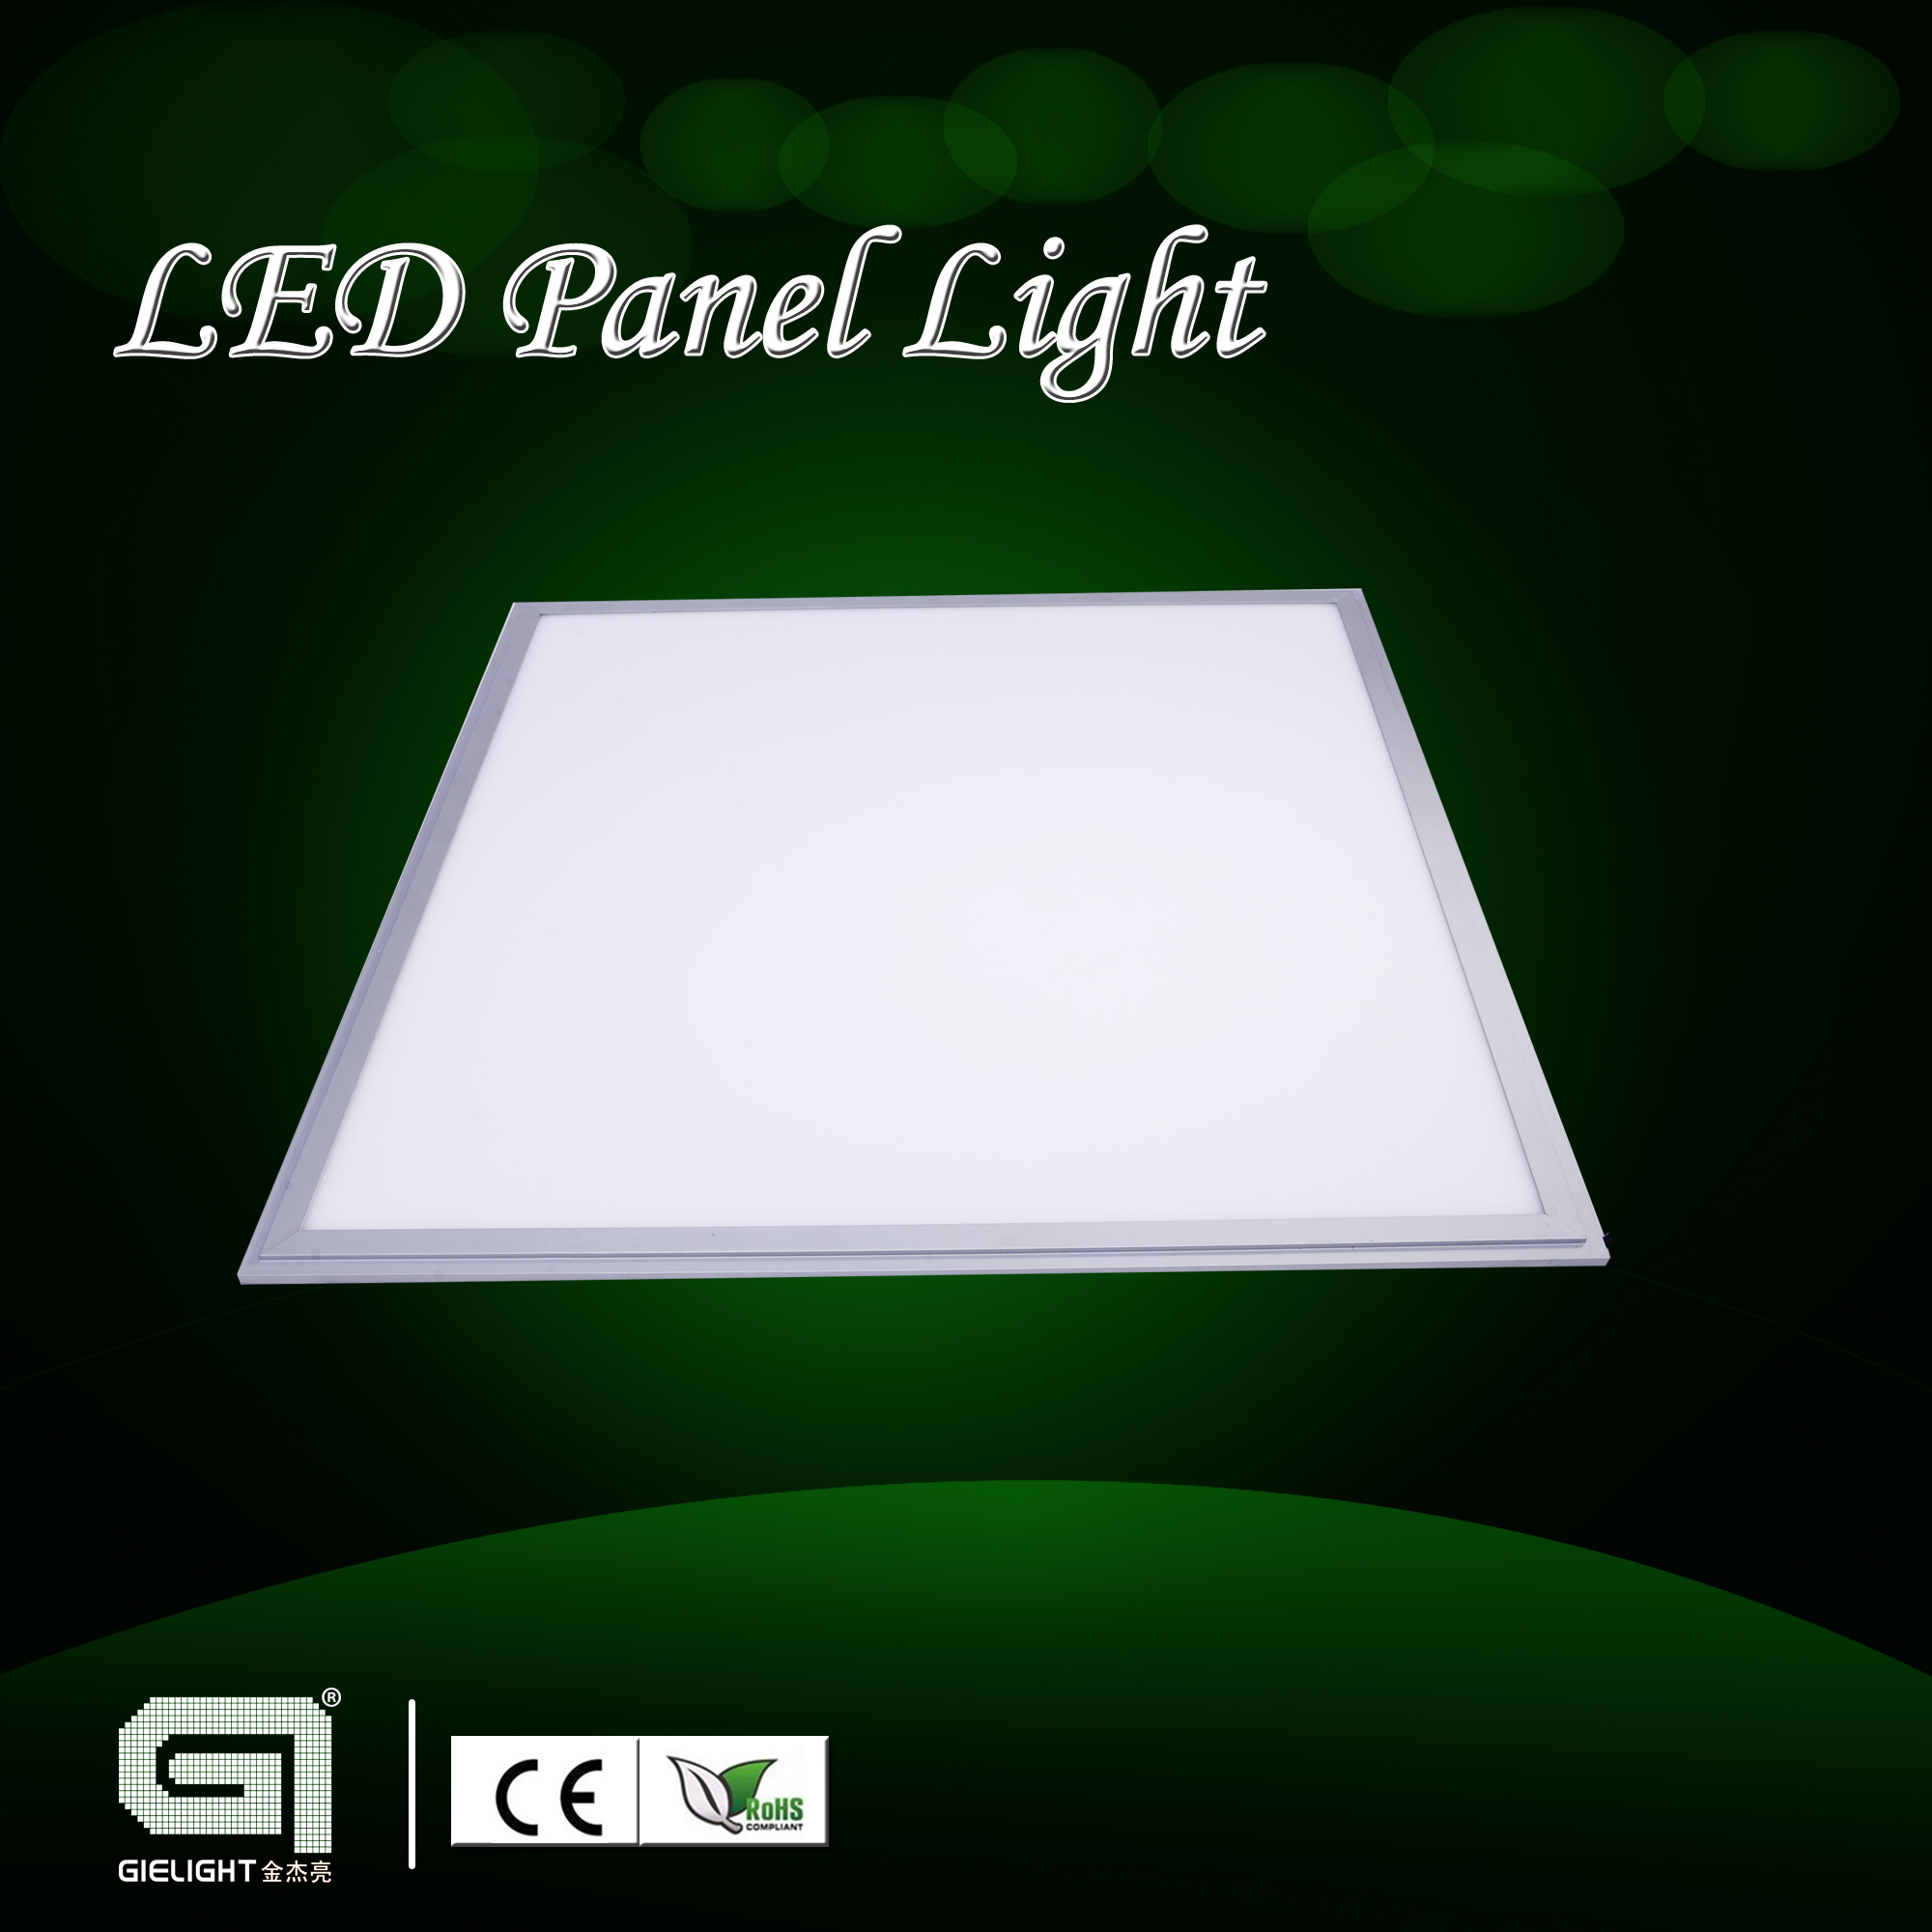 Amazing $22.5 hot sales led light panel 60*60cm 36w recessed, suspended, mounted, office light